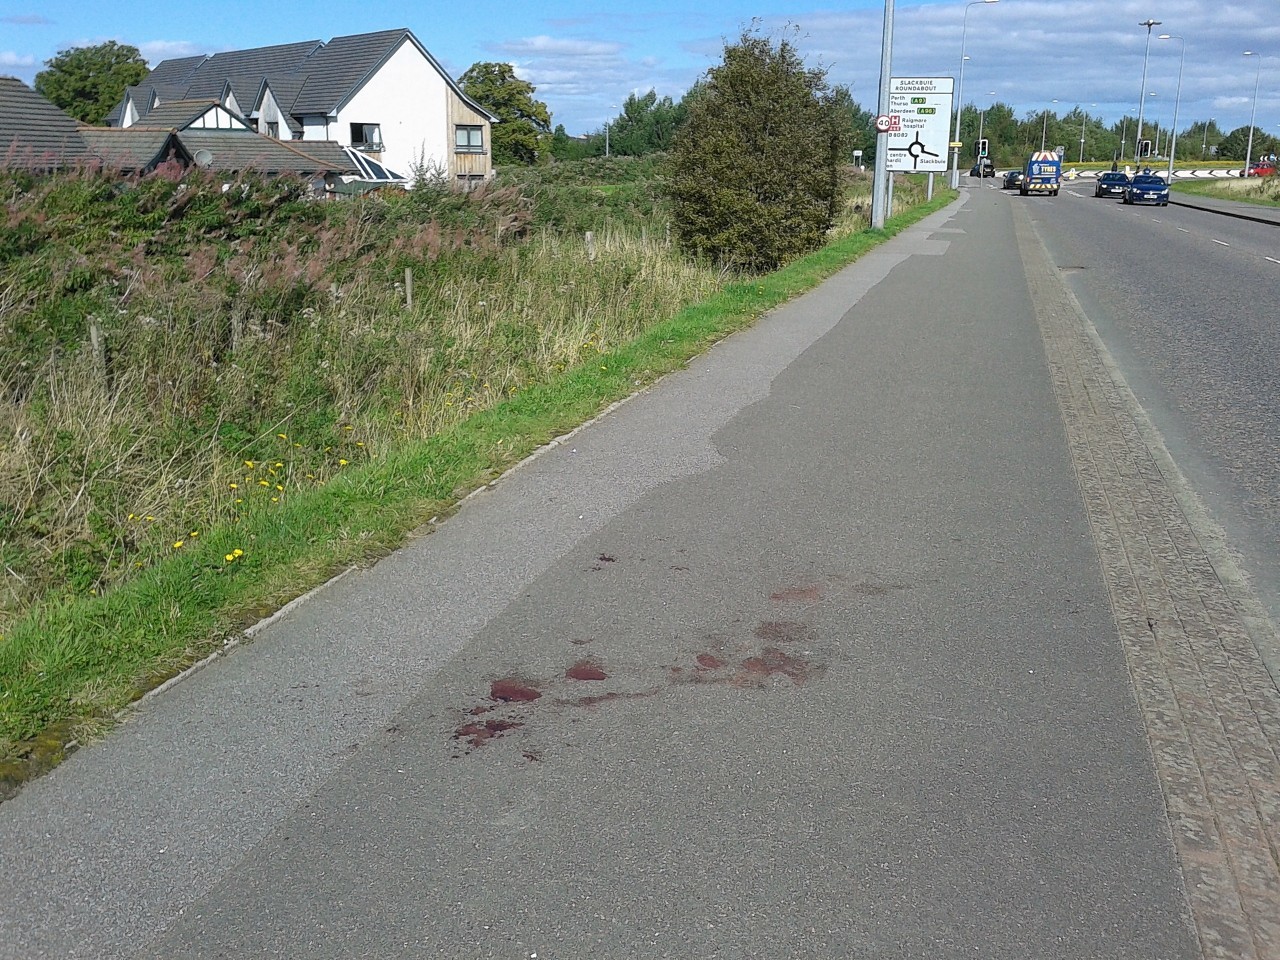 Blood left on the road following the incident in Inverness